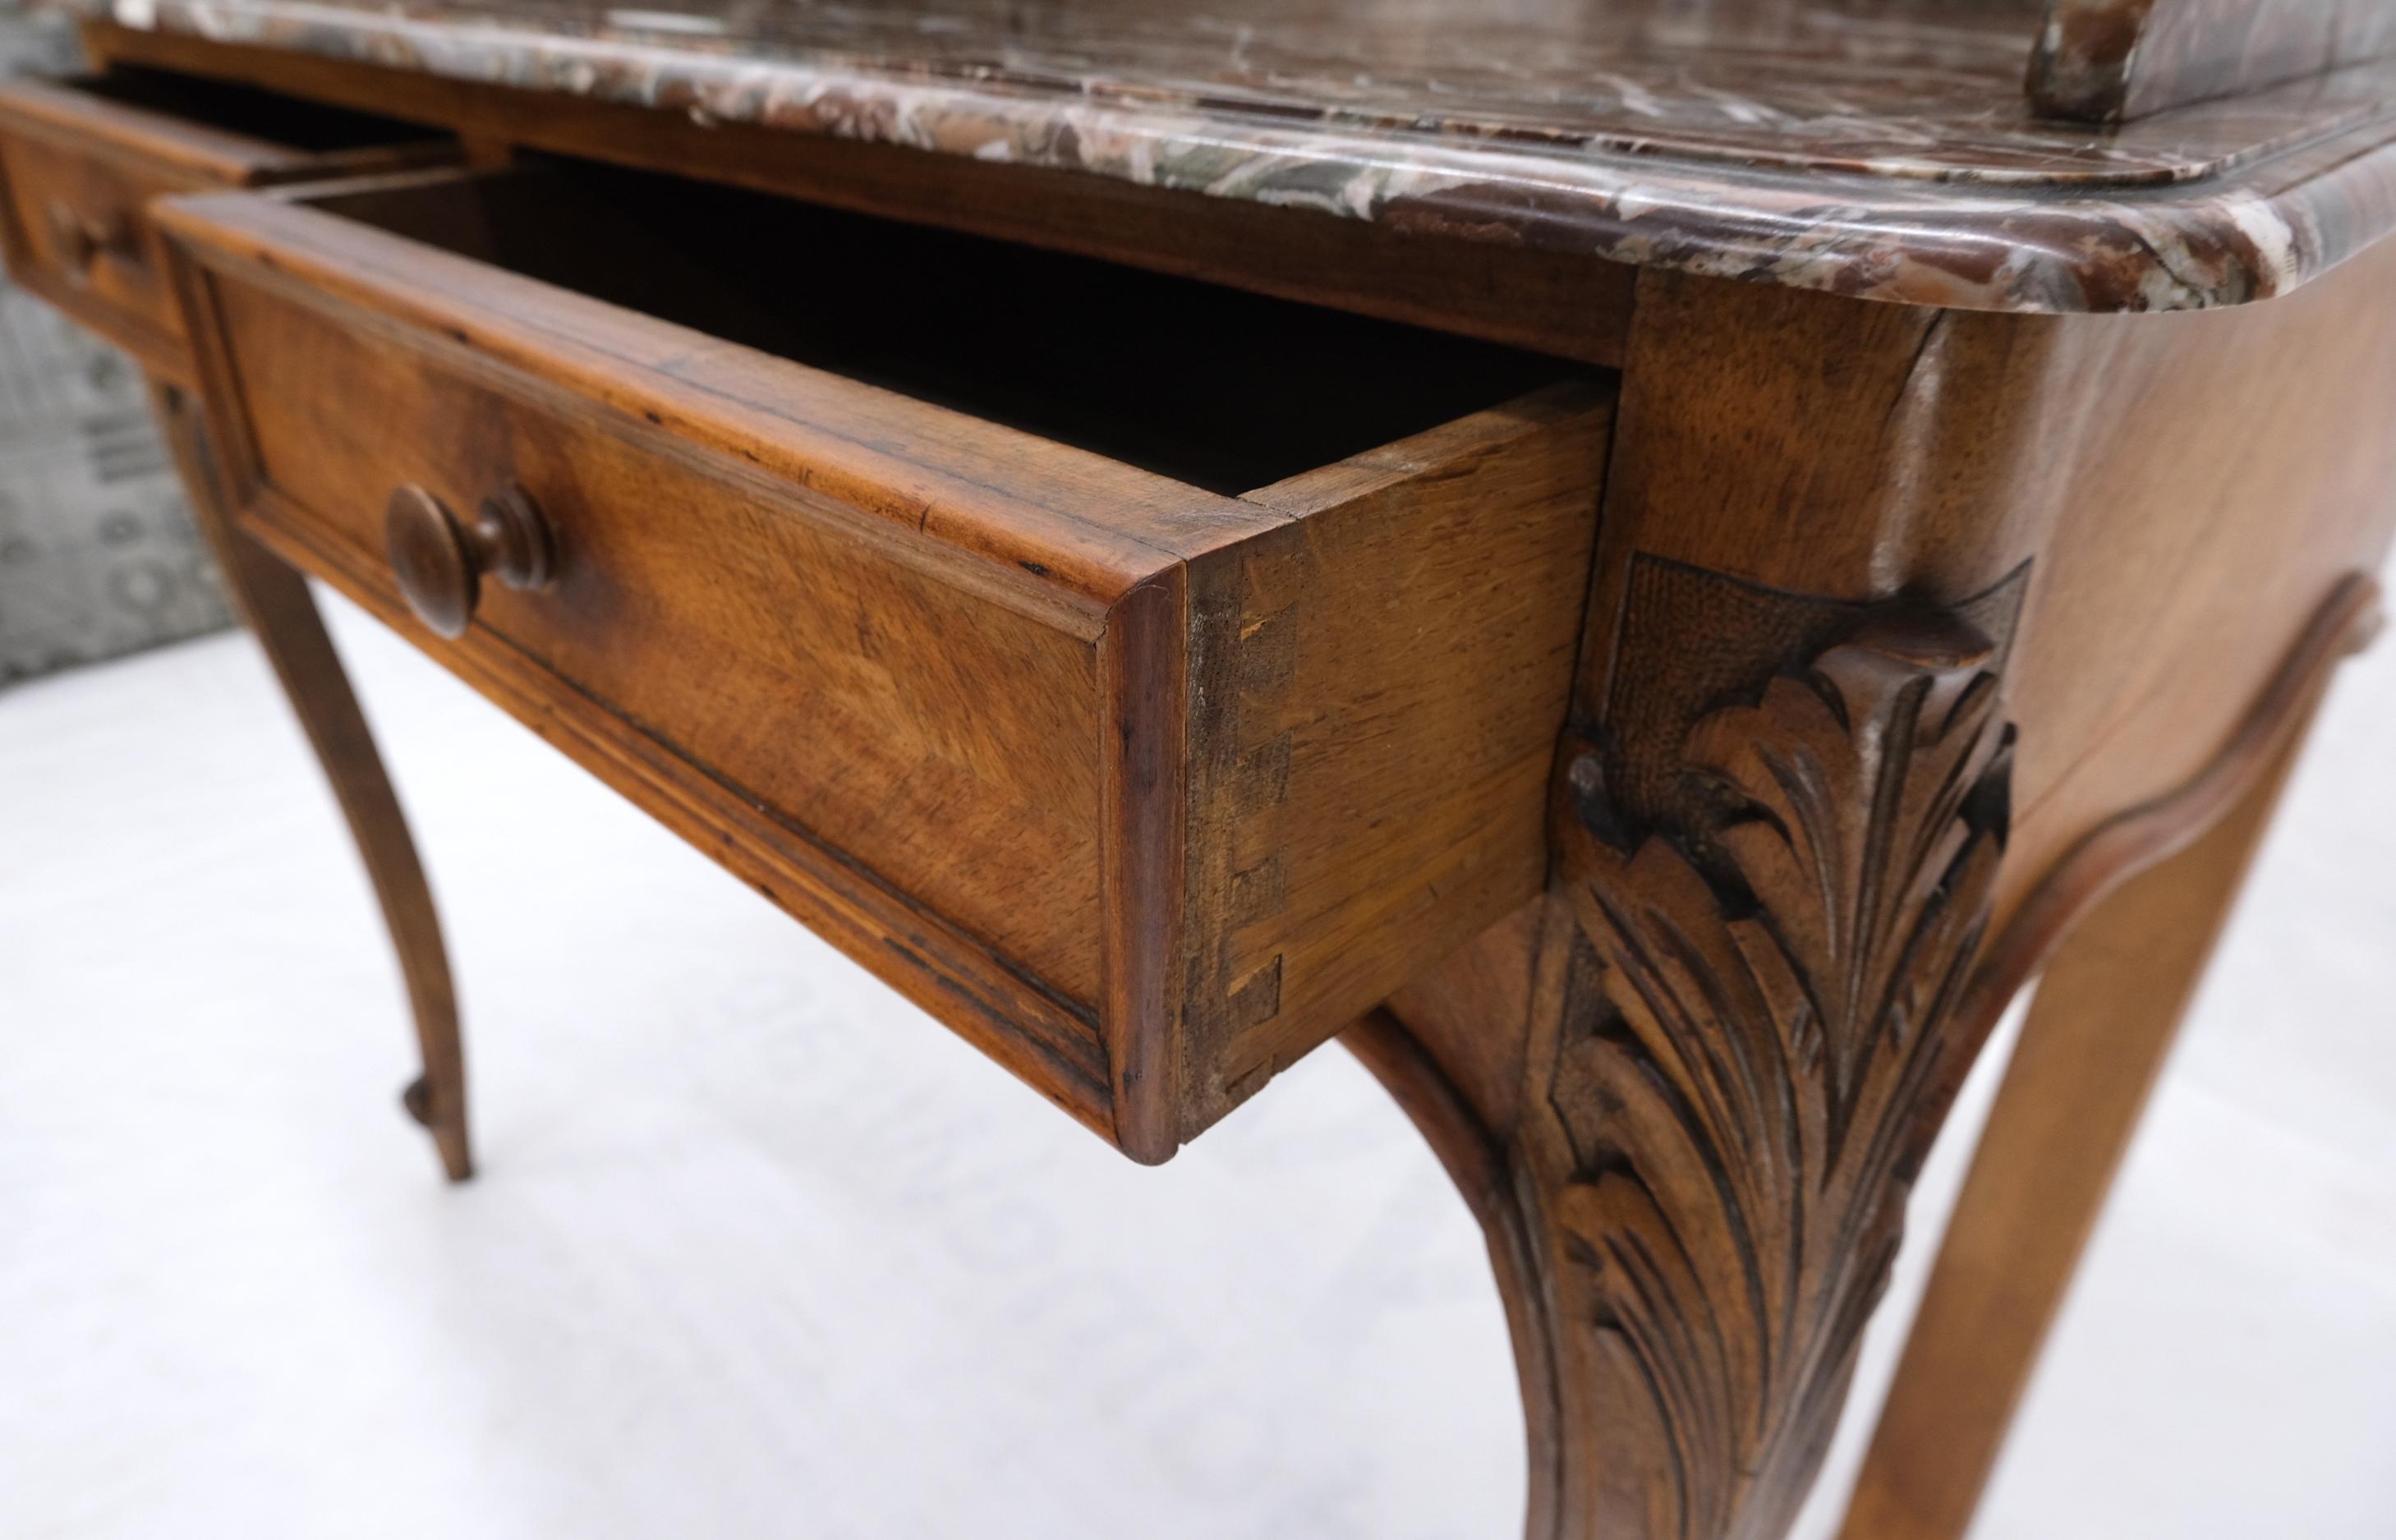 19th Century French Satin Wood Marble Top Two Drawers Console Hall Table Writing Desk